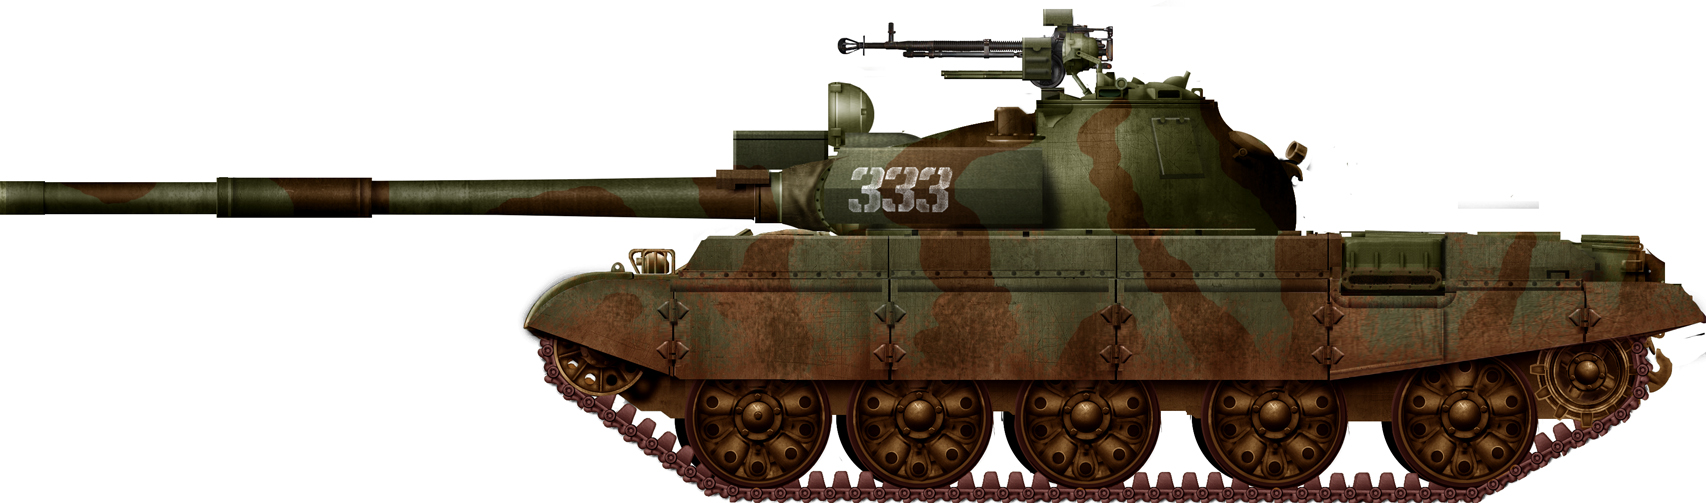 Since the new tanks have visible internal armor, can we get spall